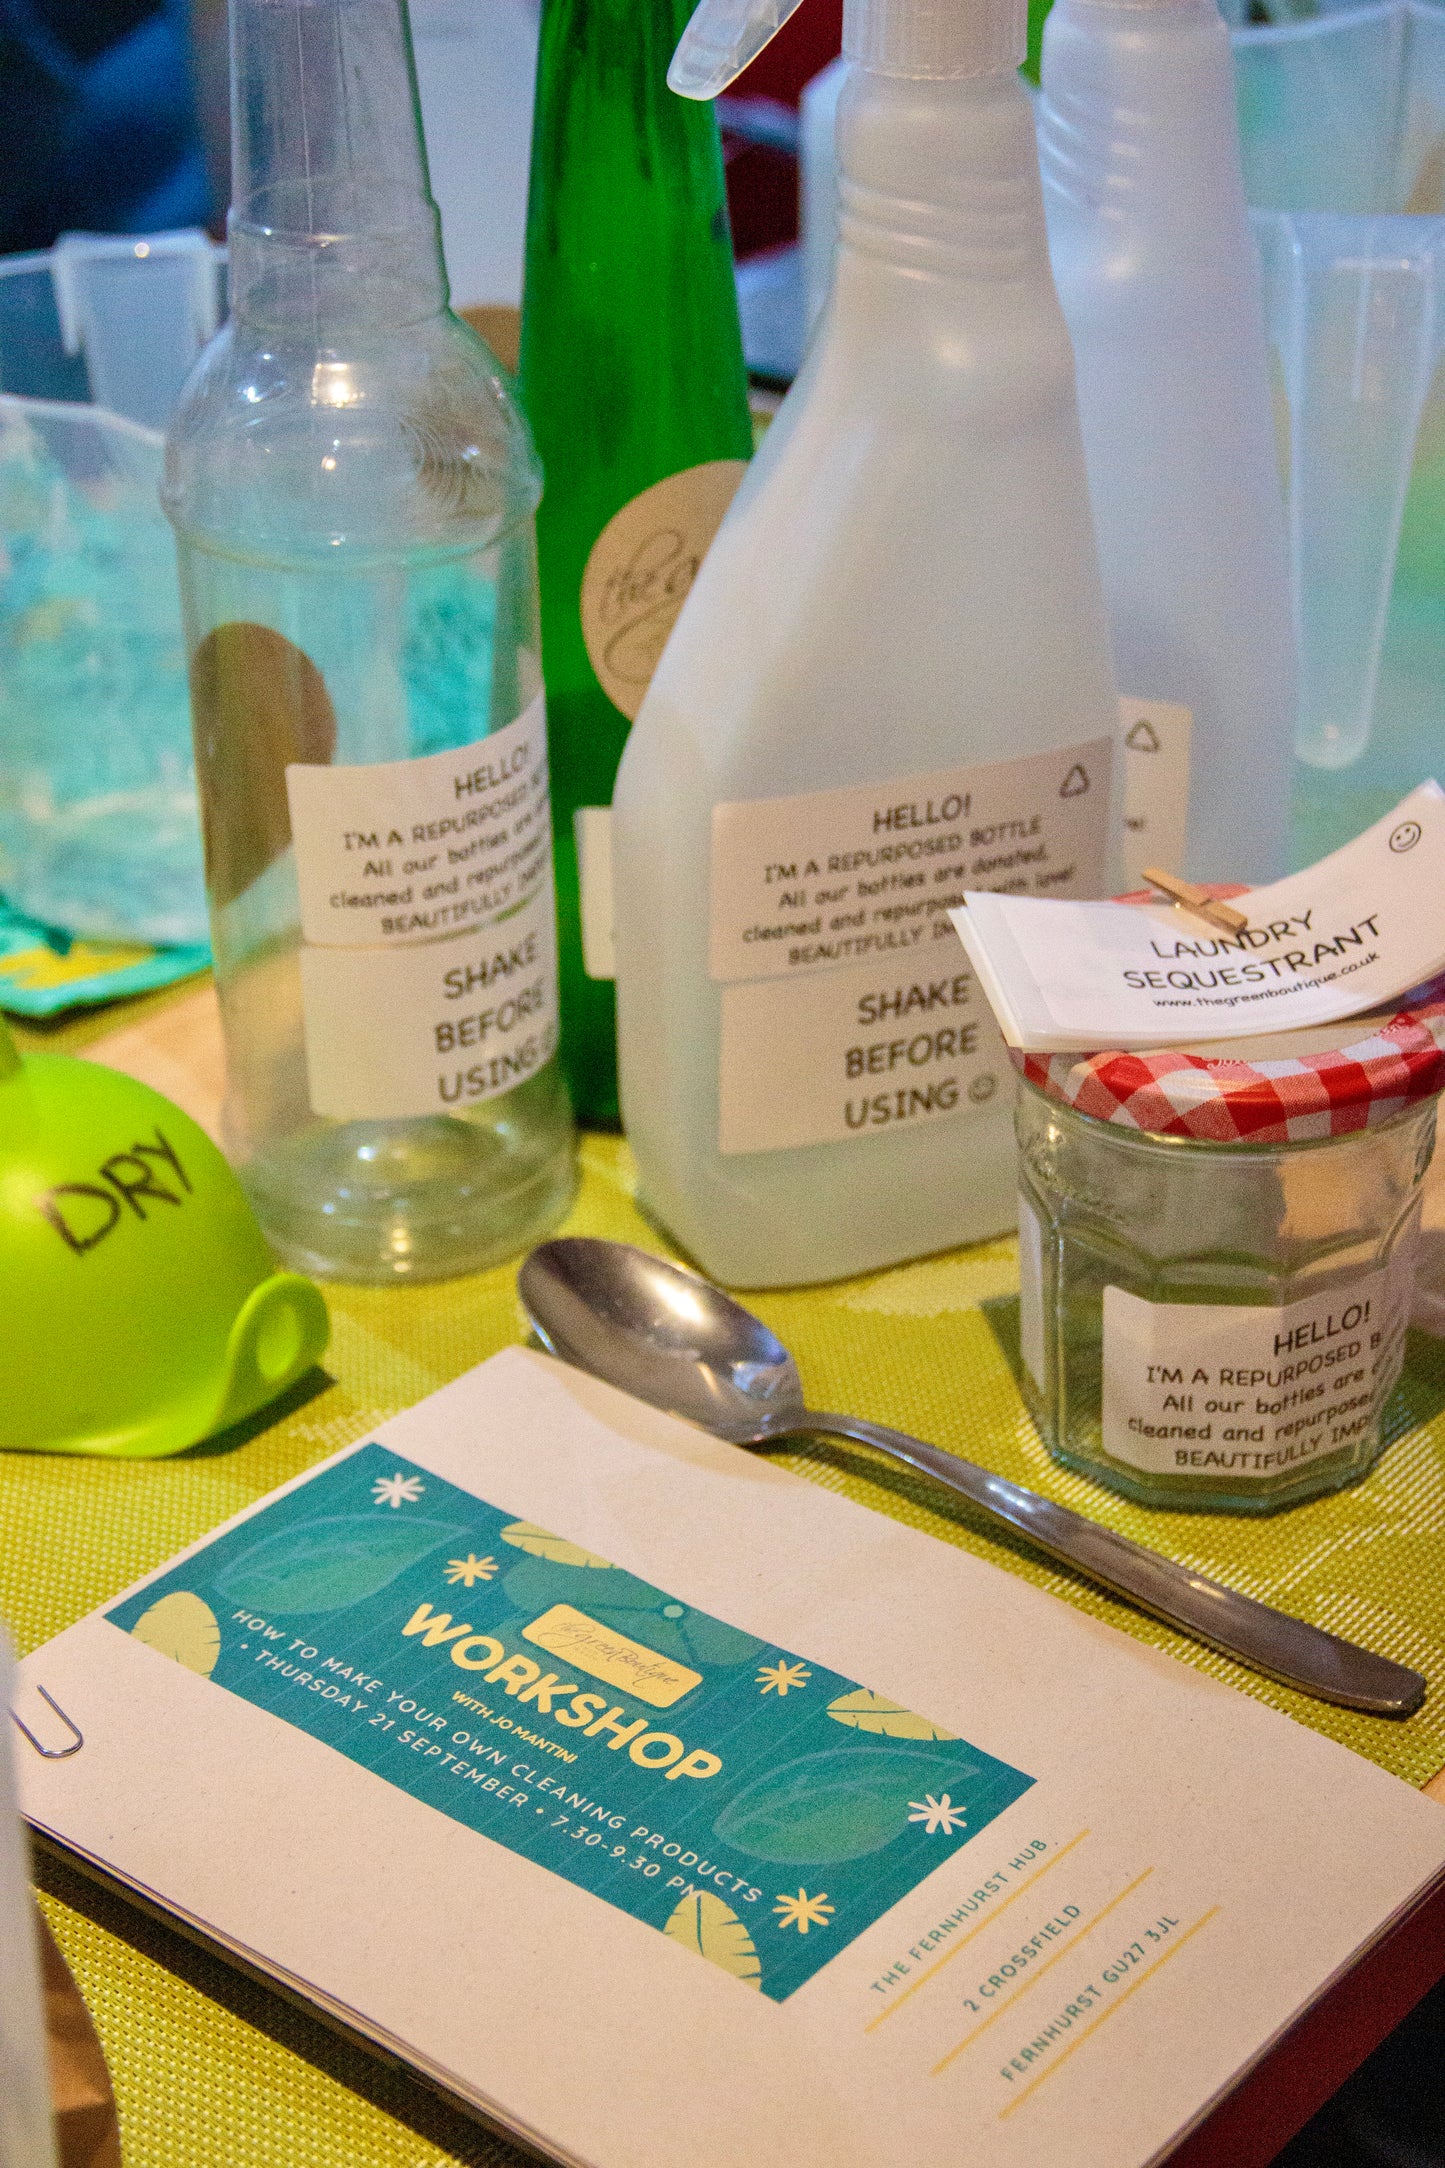 MAKE YOUR OWN NATURAL, ZERO-WASTE CLEANING PRODUCTS: FERNHURST WORKSHOP